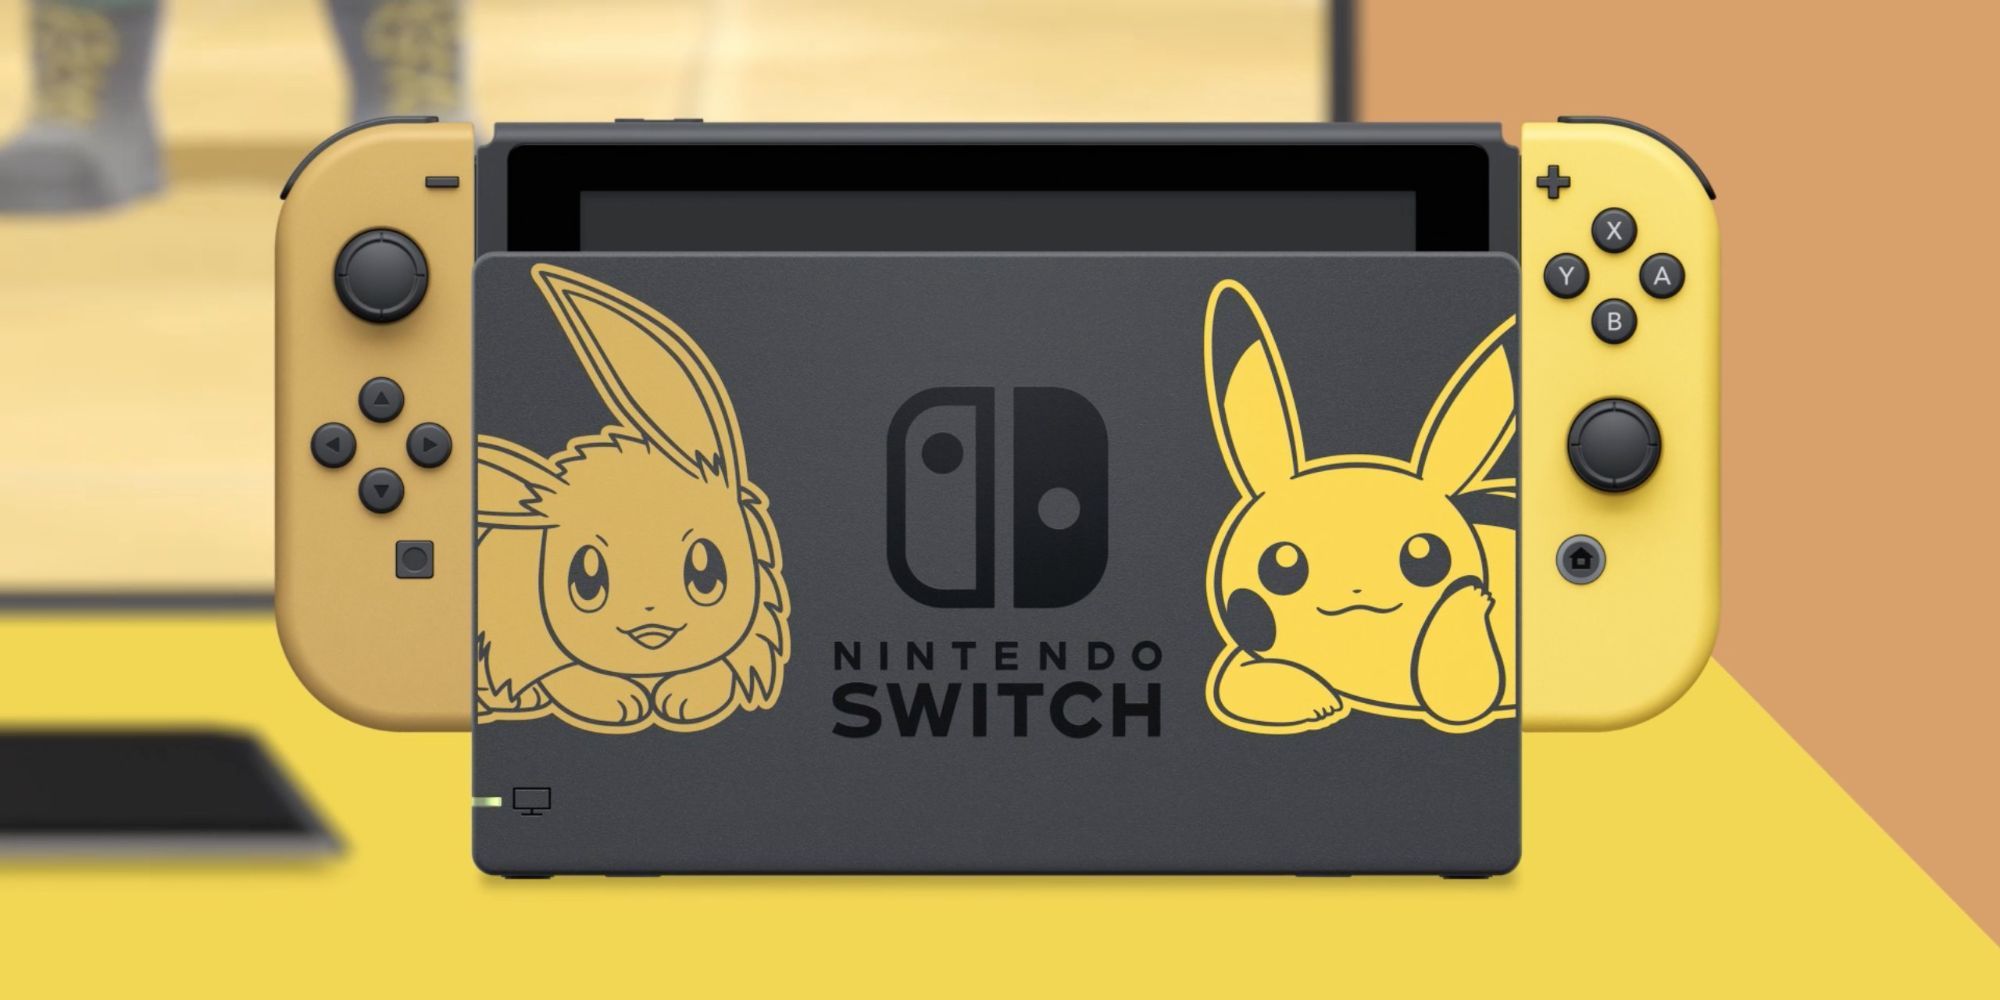 Nintendo Switch with brown and yellow Joy-Cons with Pikachu and Eevee dock designs for Pokemon Let's Go